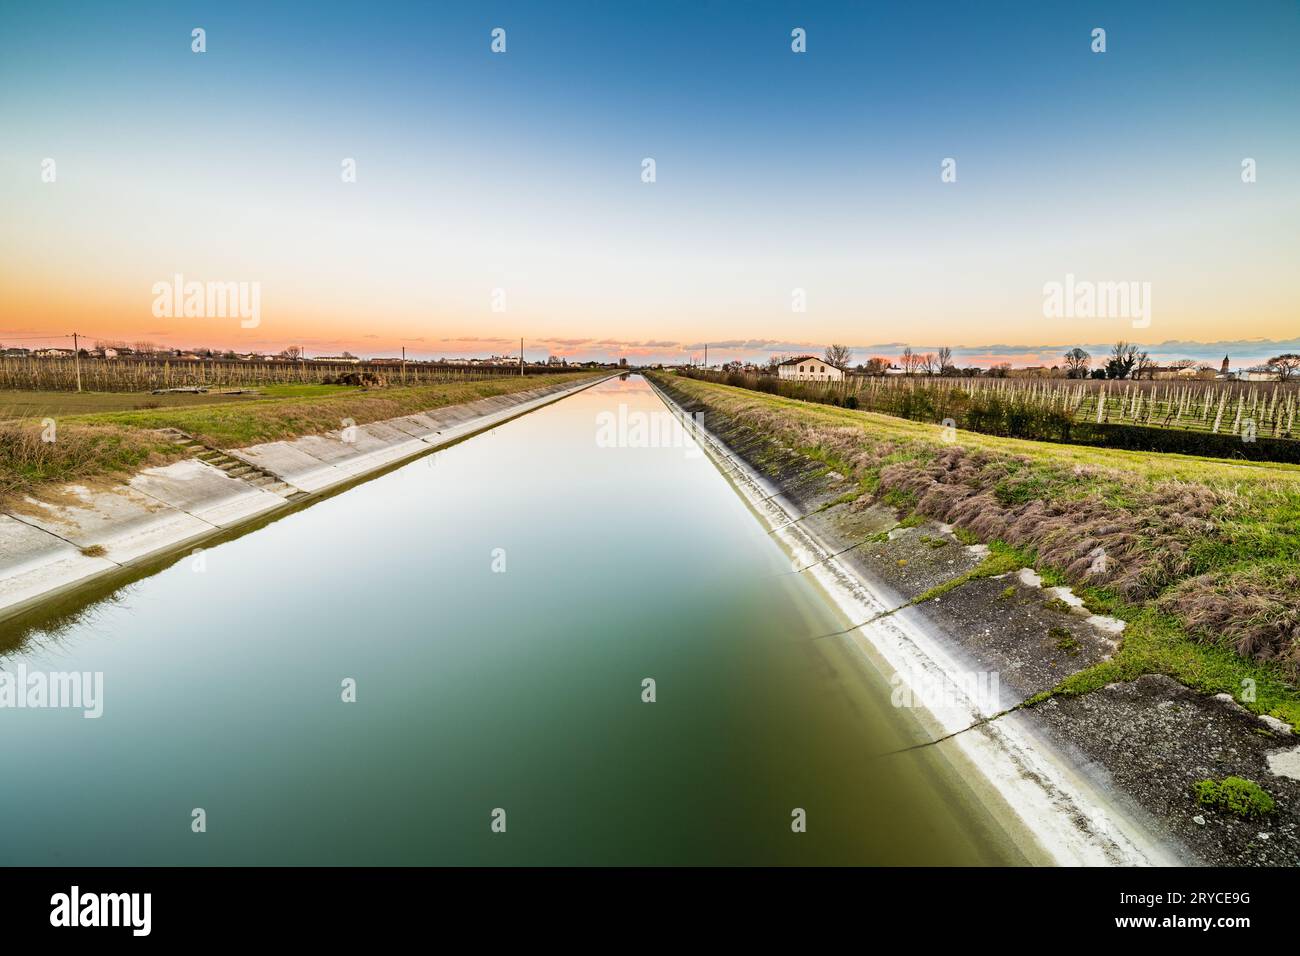 Water canal and agriculture Stock Photo